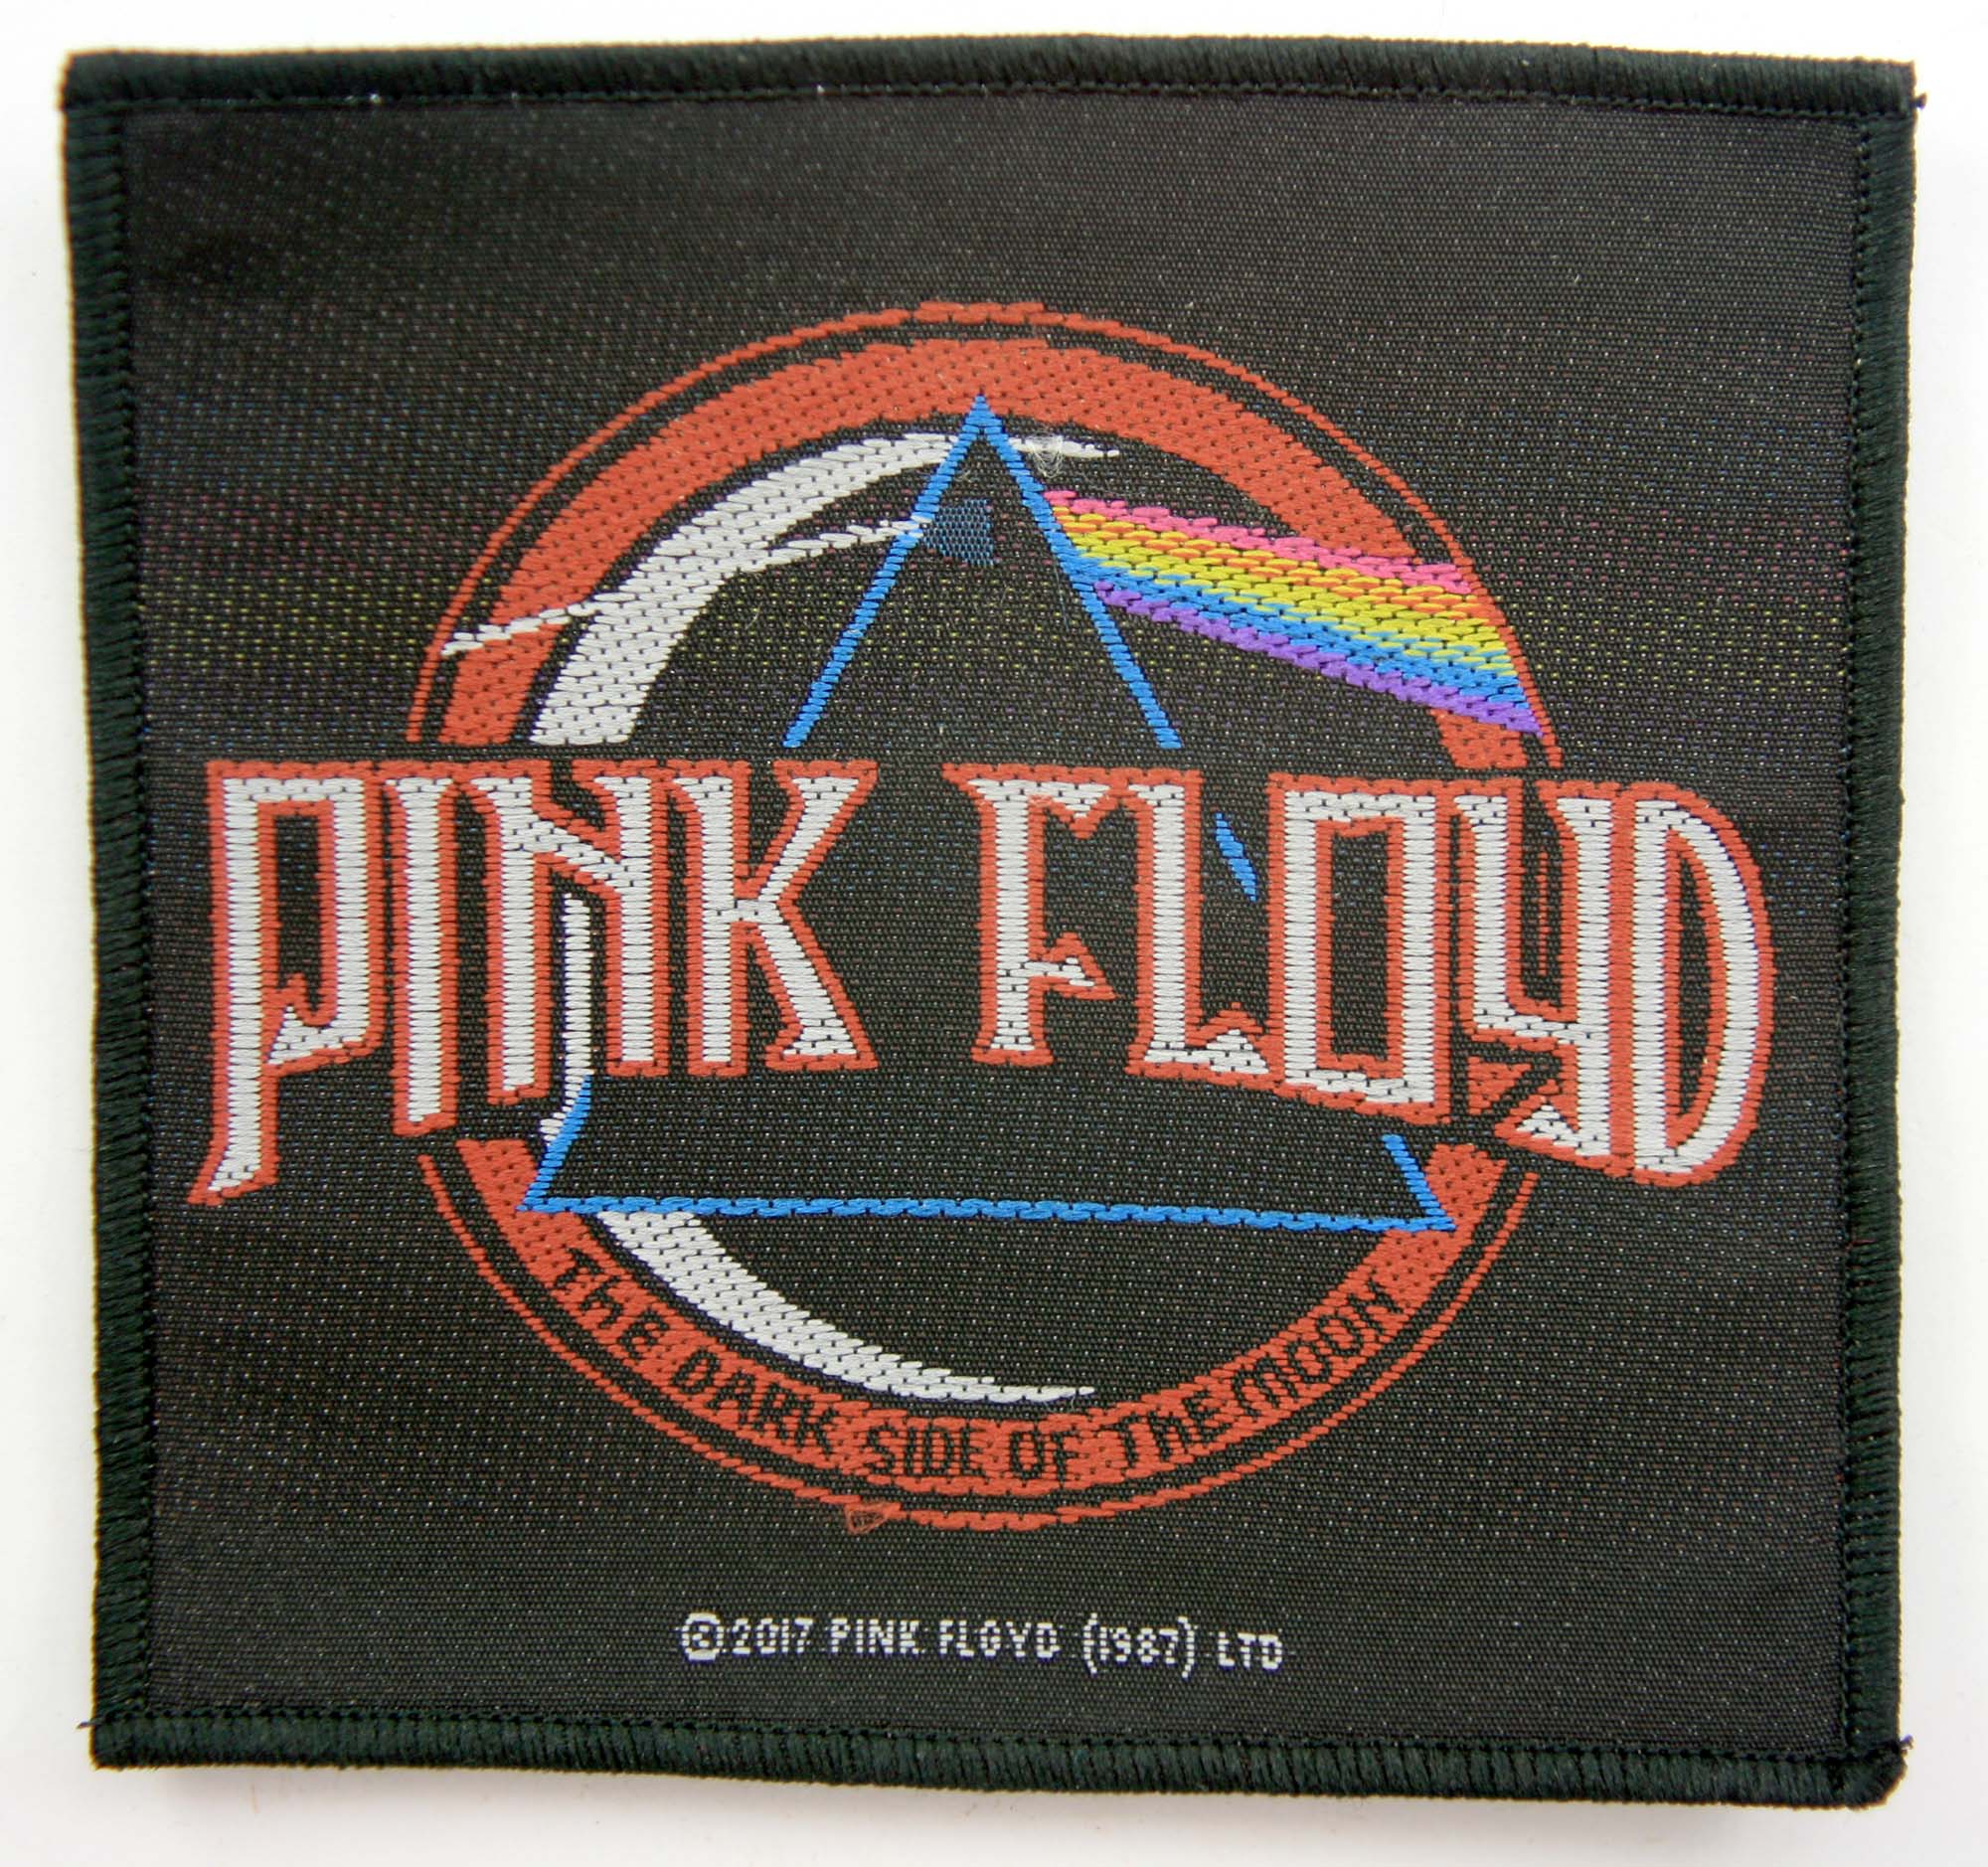 Pink Floyd Logo - Pink Floyd Dark Side of the Moon Woven Patch